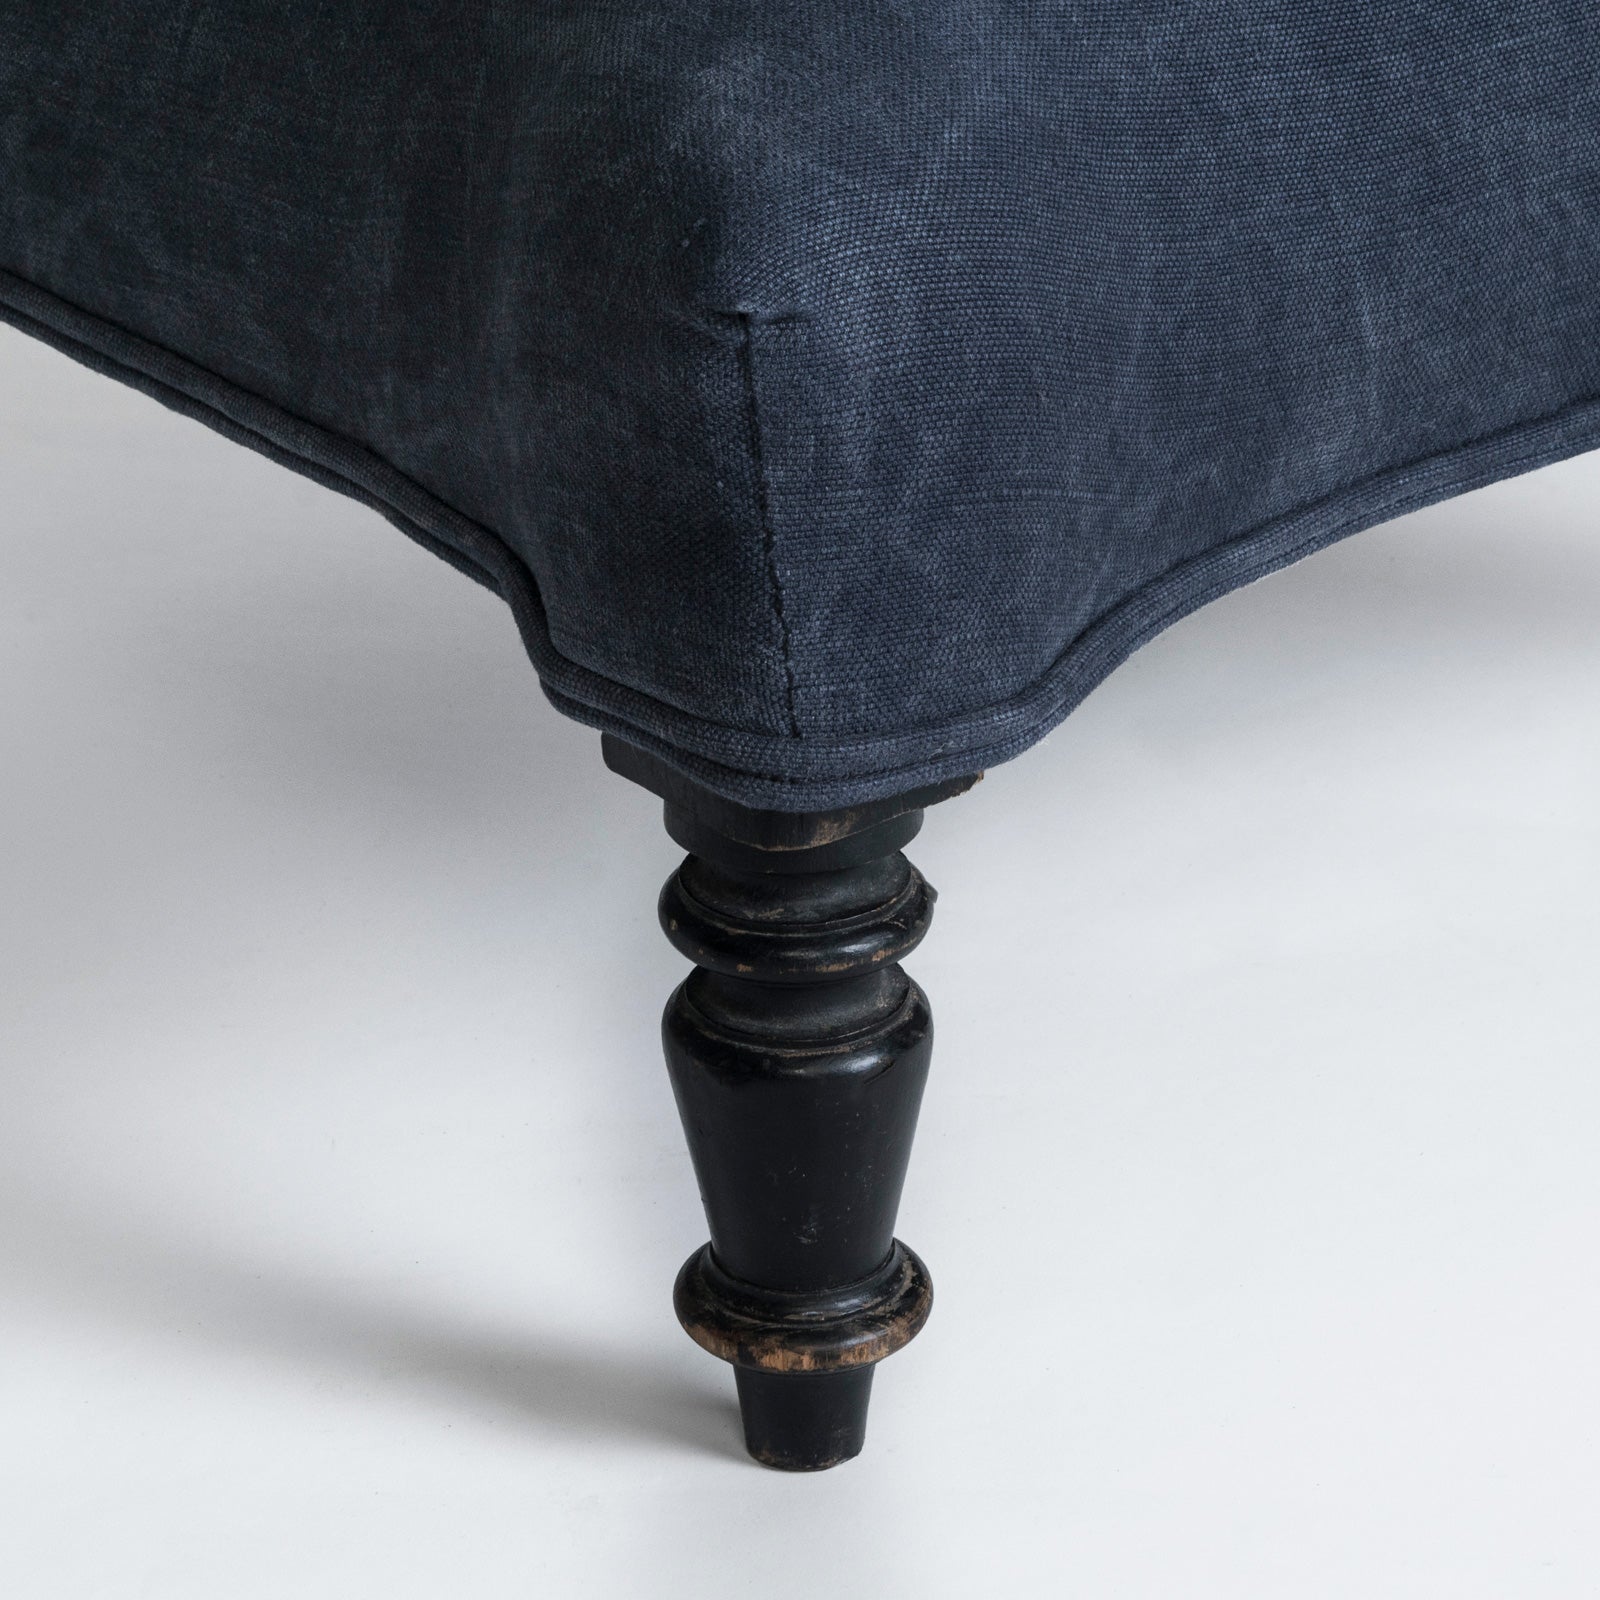 19th C Napoleon III Style Stool or Foot Bench